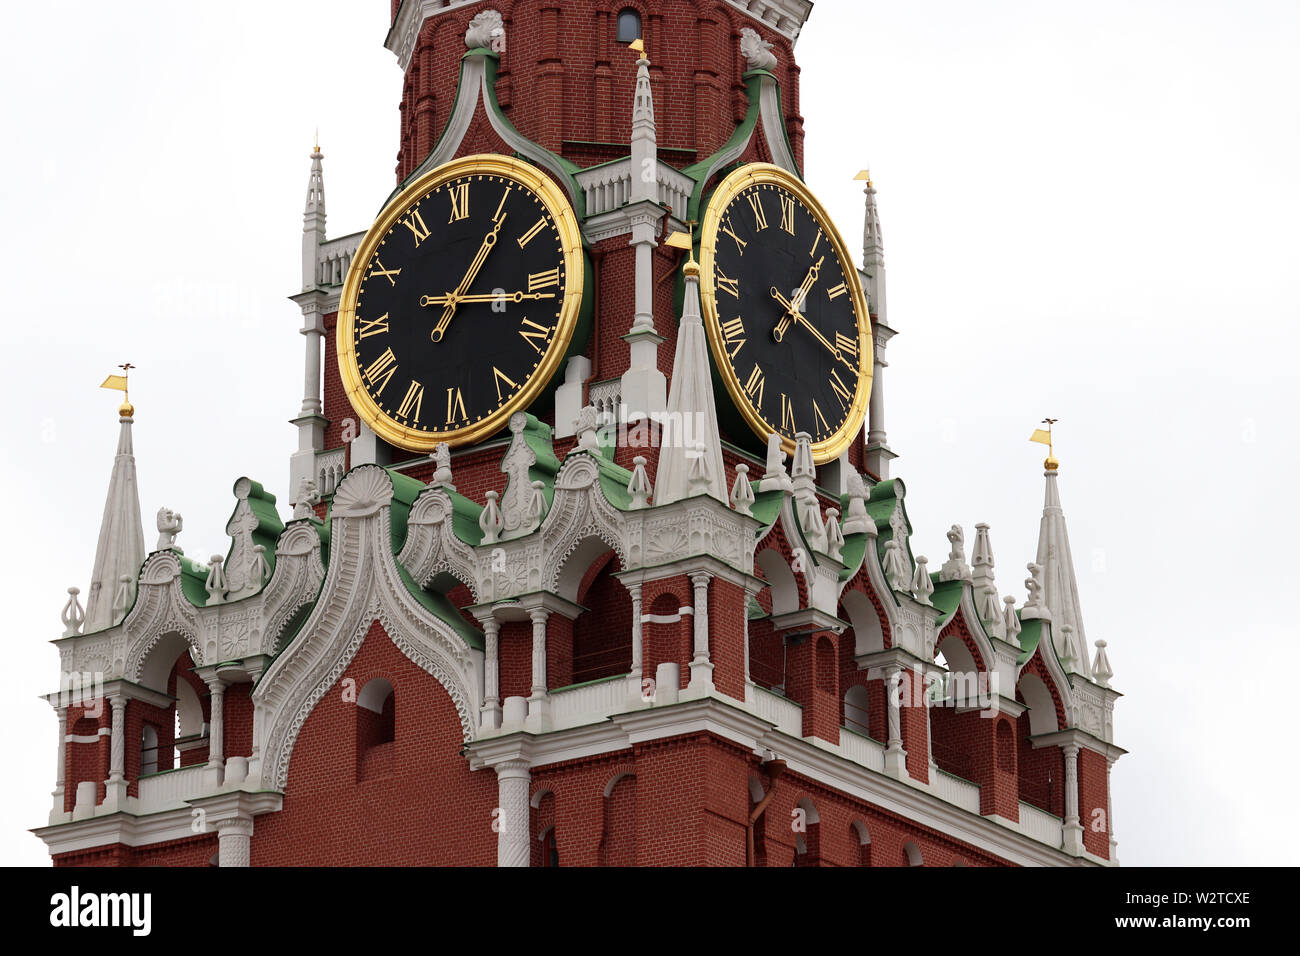 Chimes of Spasskaya tower, symbol of Russia on Red Square. Moscow Kremlin tower clock isolated on sky background, time concept Stock Photo